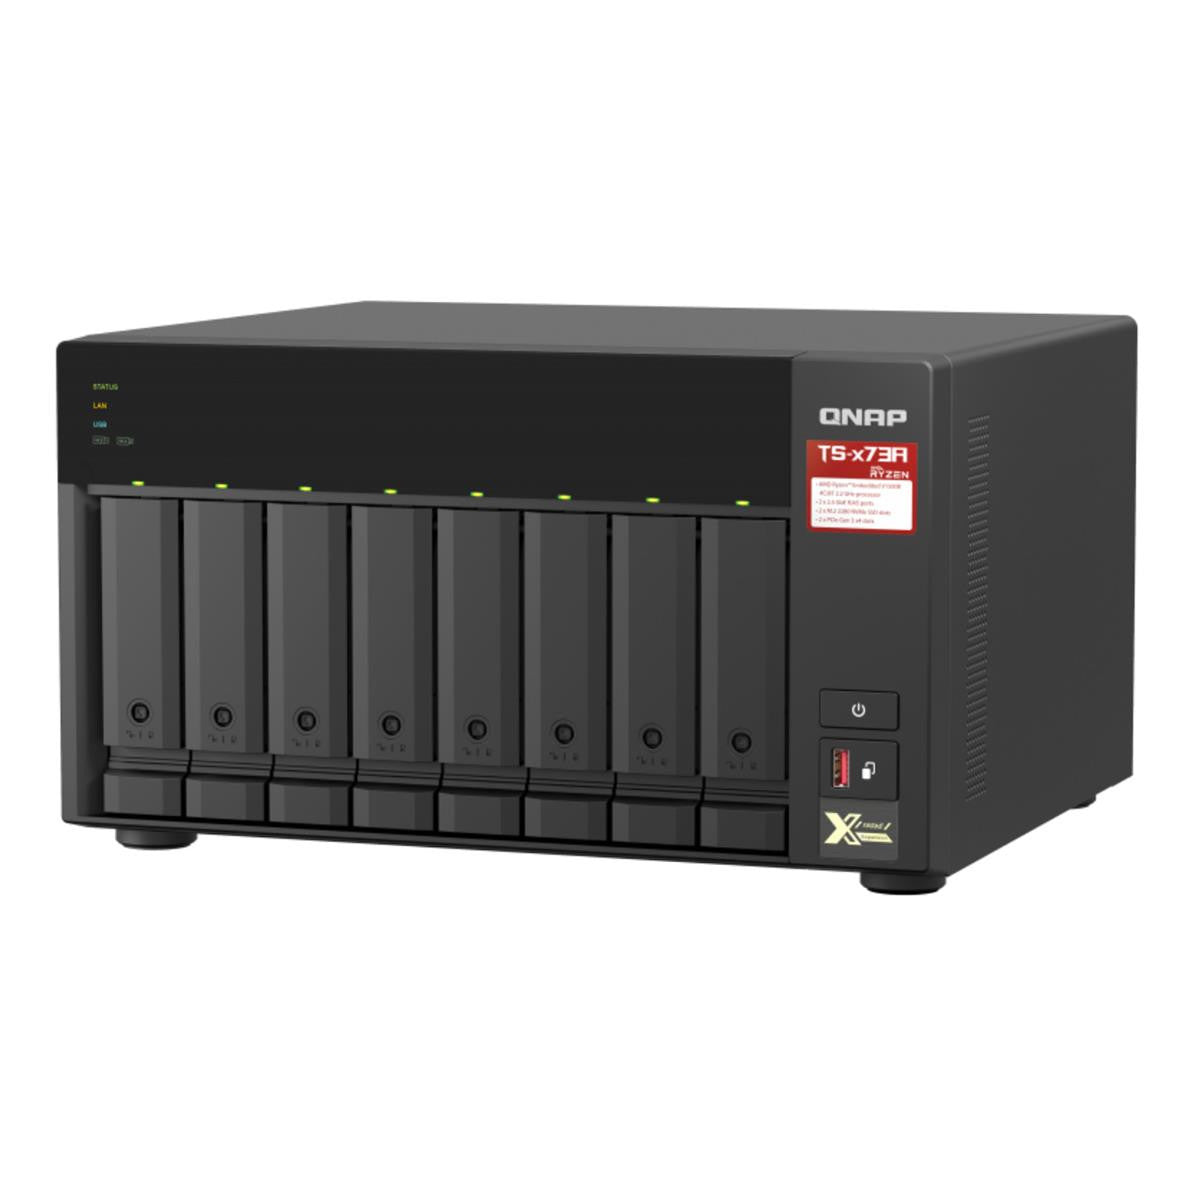 QNAP TS-873A 8-BAY NAS with 64GB DDR4 RAM and 32TB (8x4TB) Western Digital RED PLUS Drives Fully Assembled and Tested